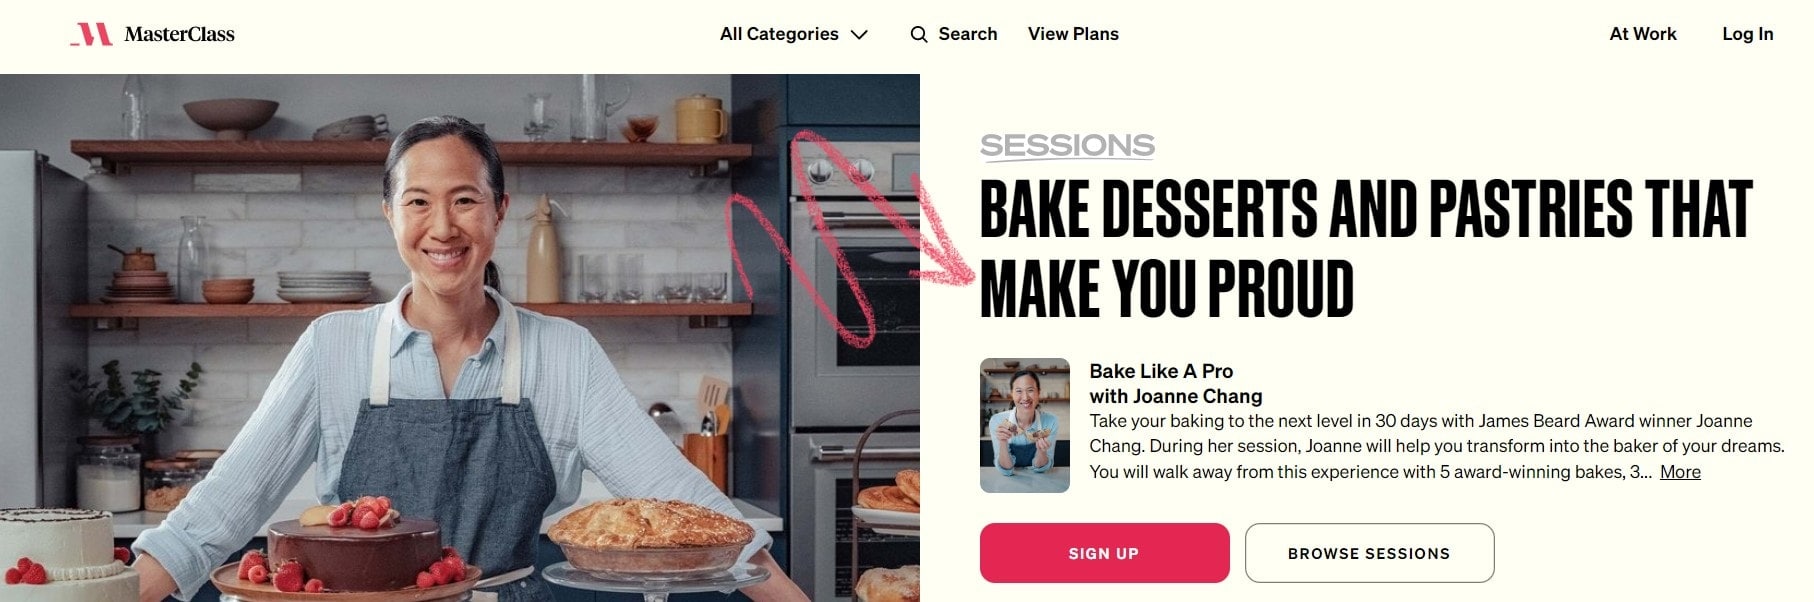 Bake Like A Pro With Joanne Chang